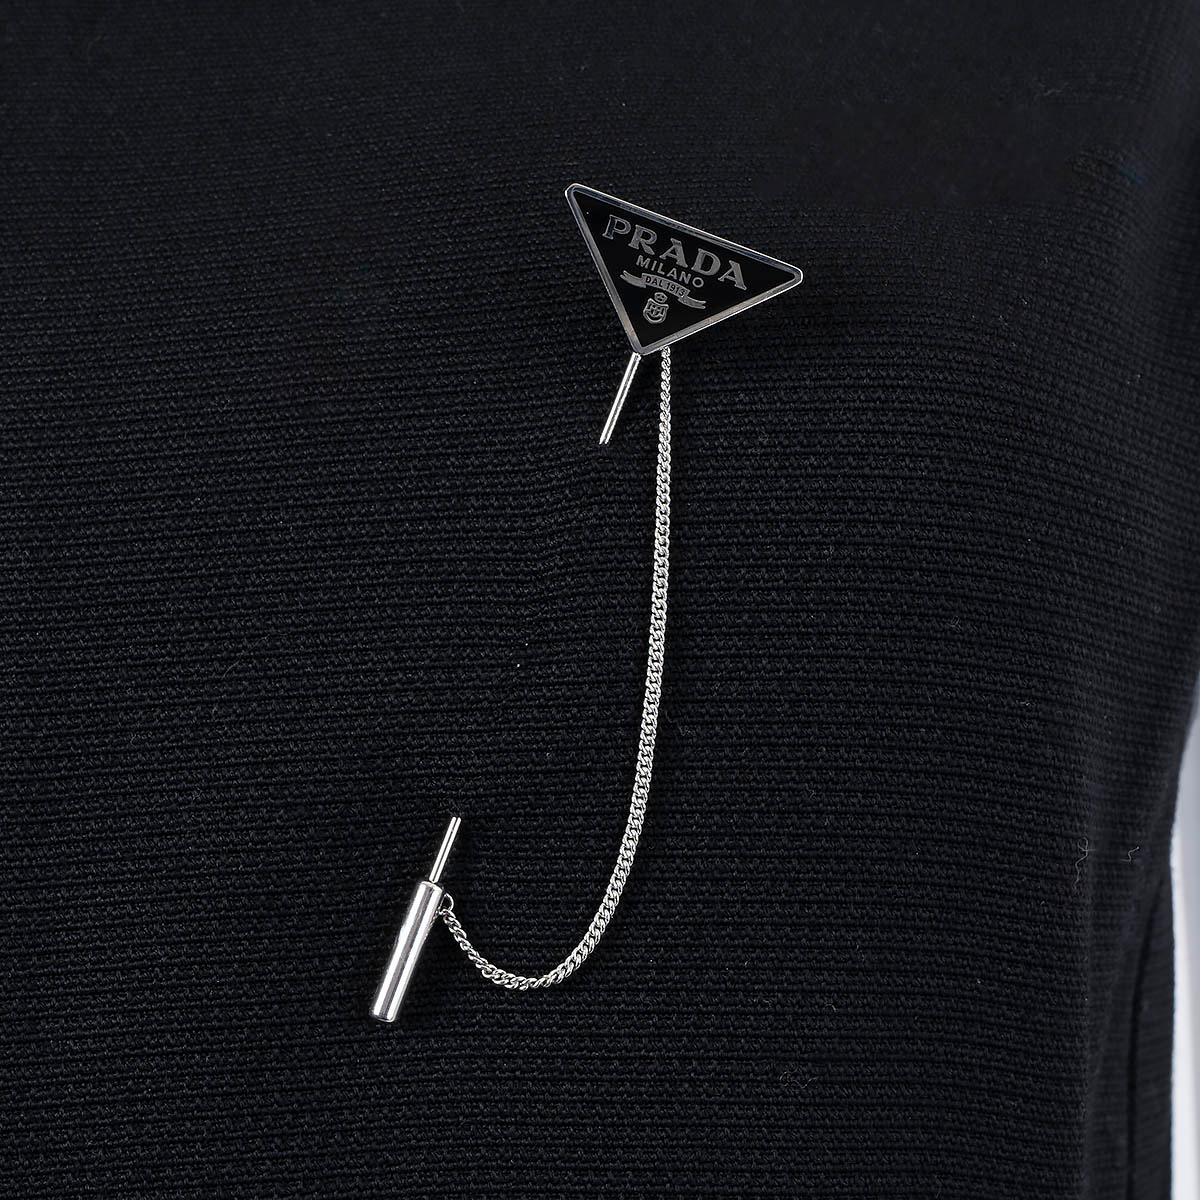 100% authentic Prada brooch in sterling silver with triangle logo in black enamel. Has been worn and is in virtually new condition. Comes with dust bag and box.

Measurements
Model	2JS113_2DSP_F0002_TU
Width	2cm (0.8in)
Length	8cm (3.1in)

All our